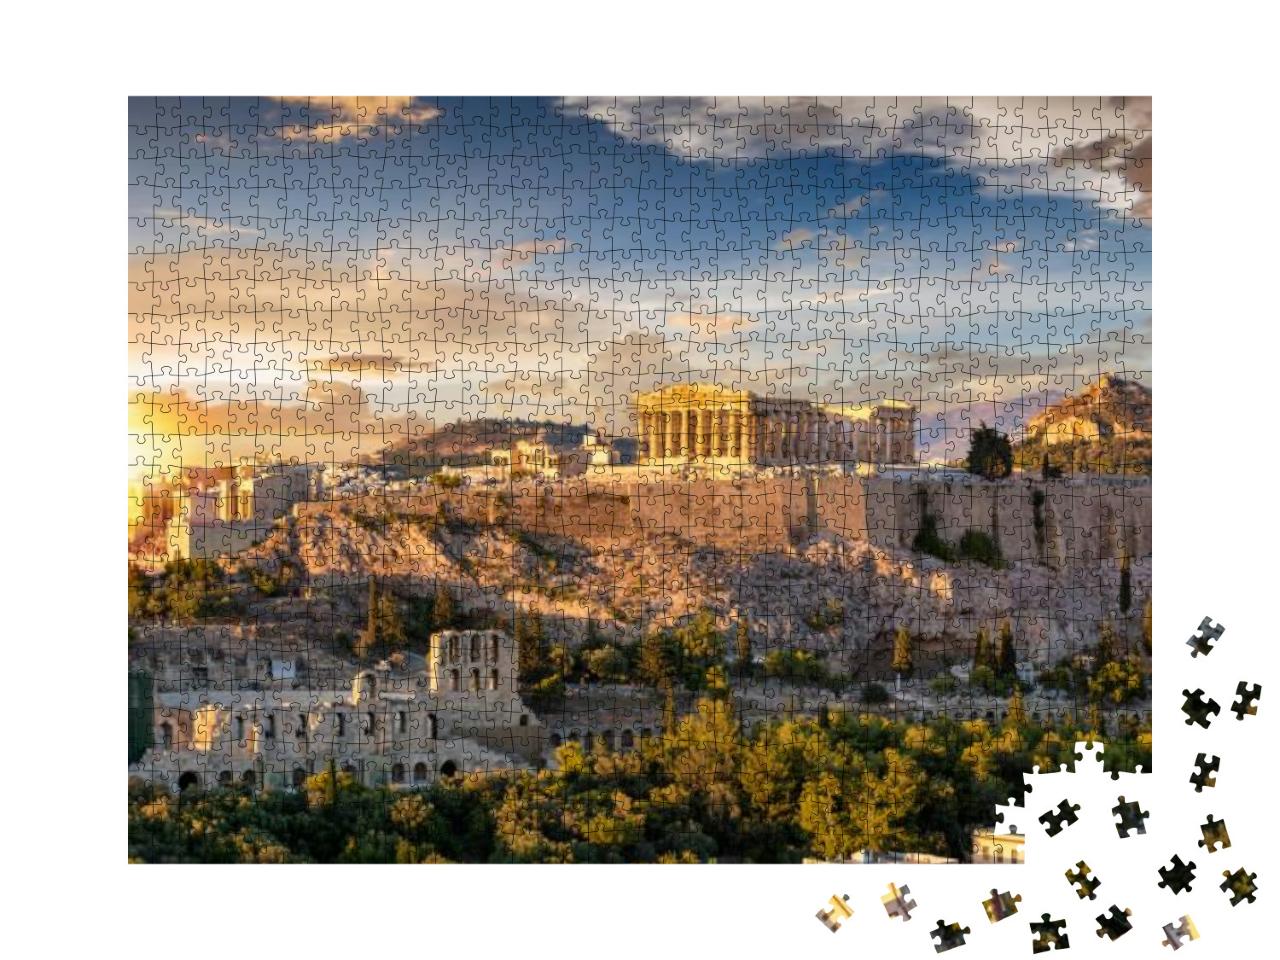 The Acropolis of Athens, Greece, with the Parthenon Templ... Jigsaw Puzzle with 1000 pieces